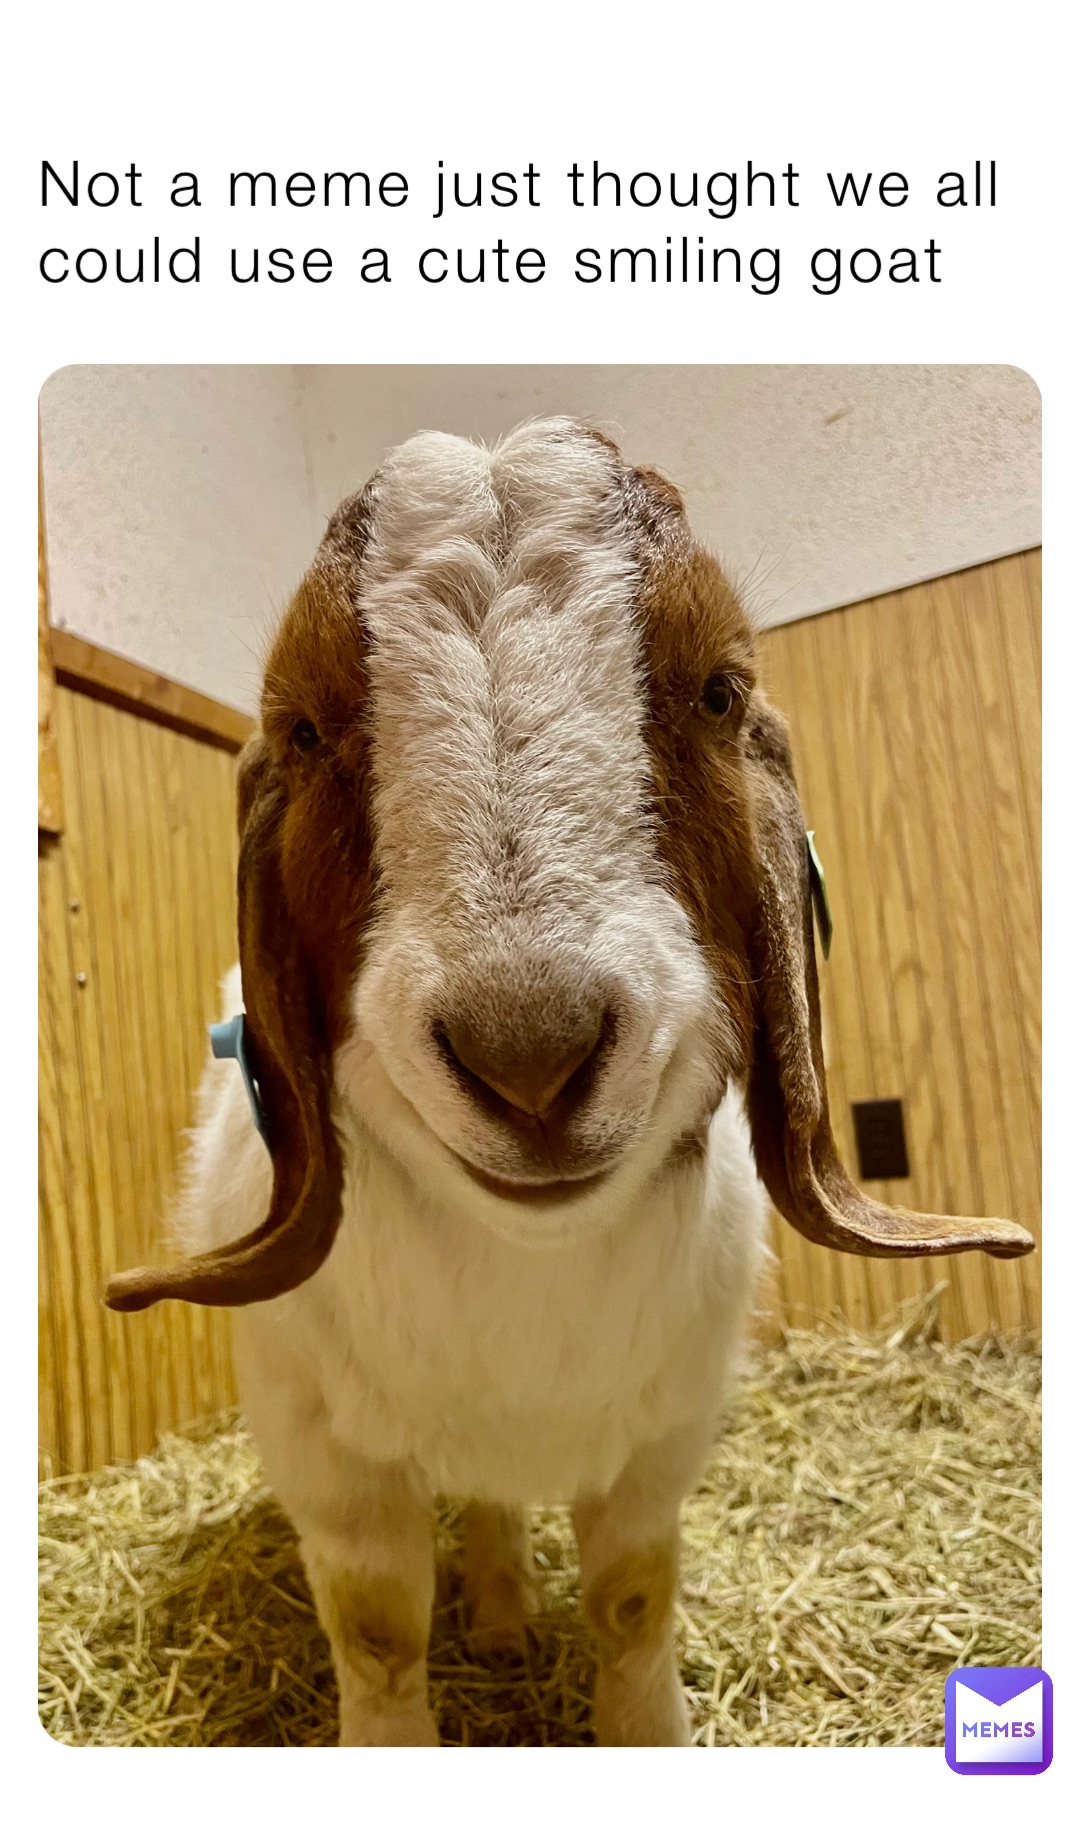 Not a meme just thought we all could use a cute smiling goat